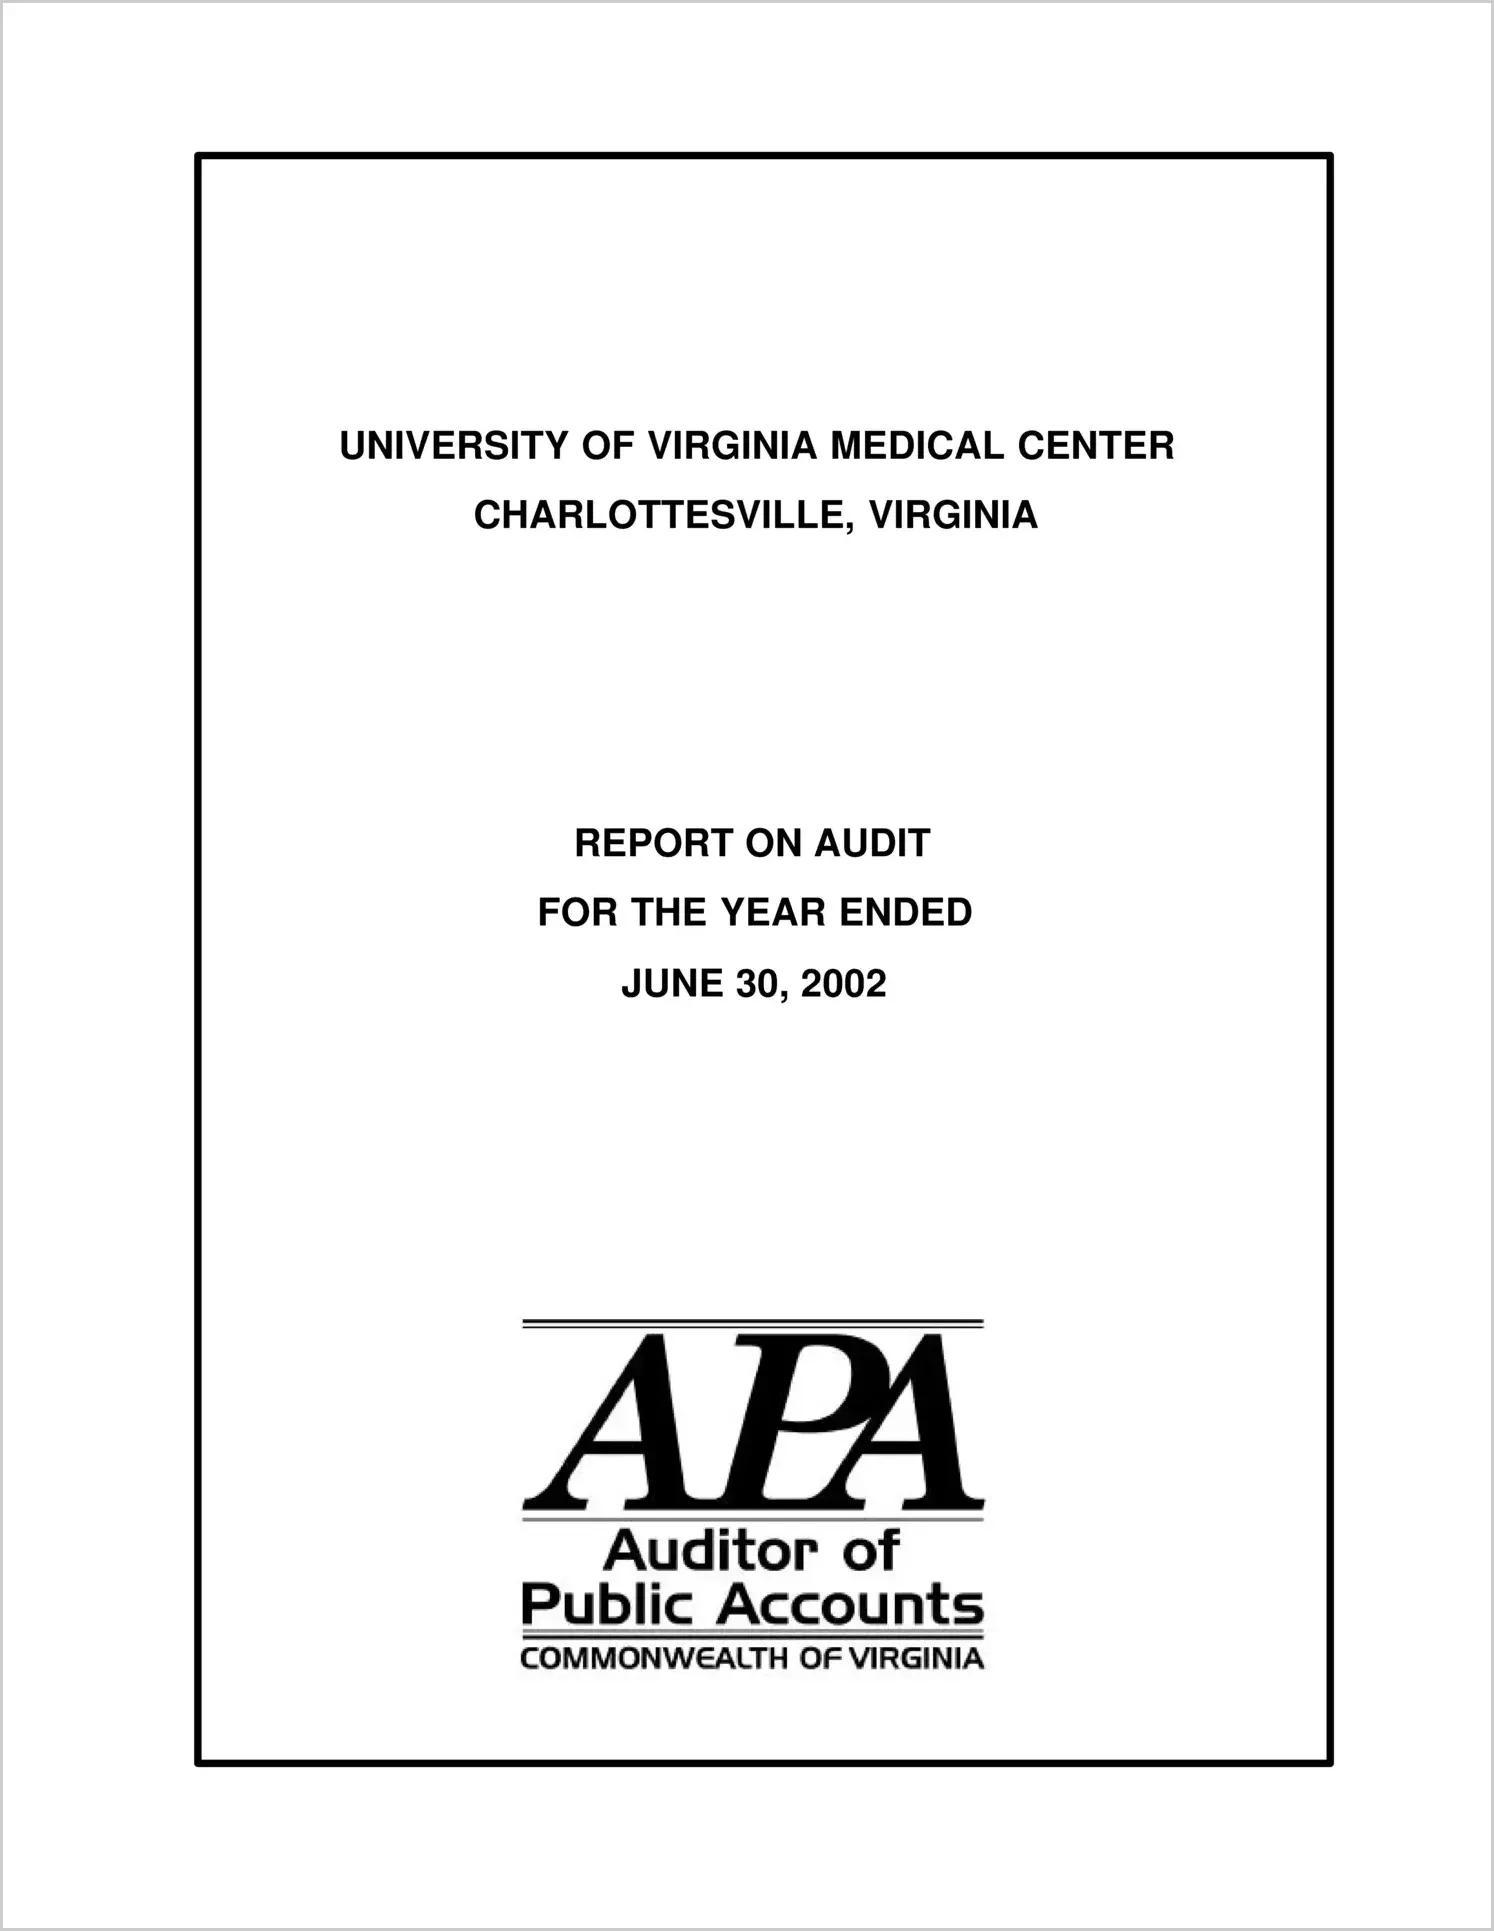 University of Virginia Medical Center for the year ended June 30, 2002